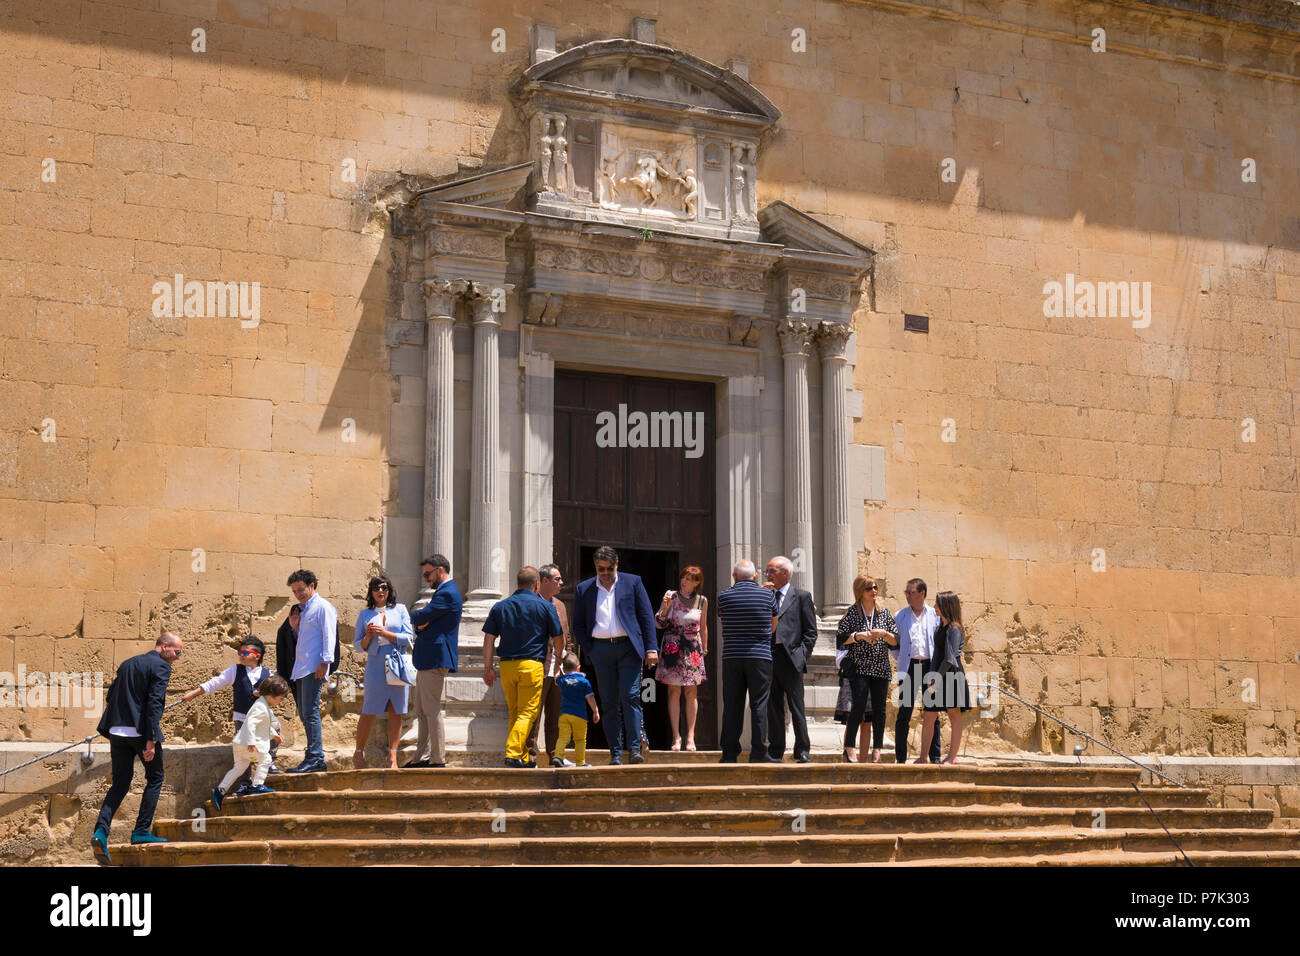 Italy Sicily old mountain town 931m 15th century Enna Cathedral Cattedrale Duomo Sunday Catholic Mass congregation leaving steps stairs side door Stock Photo